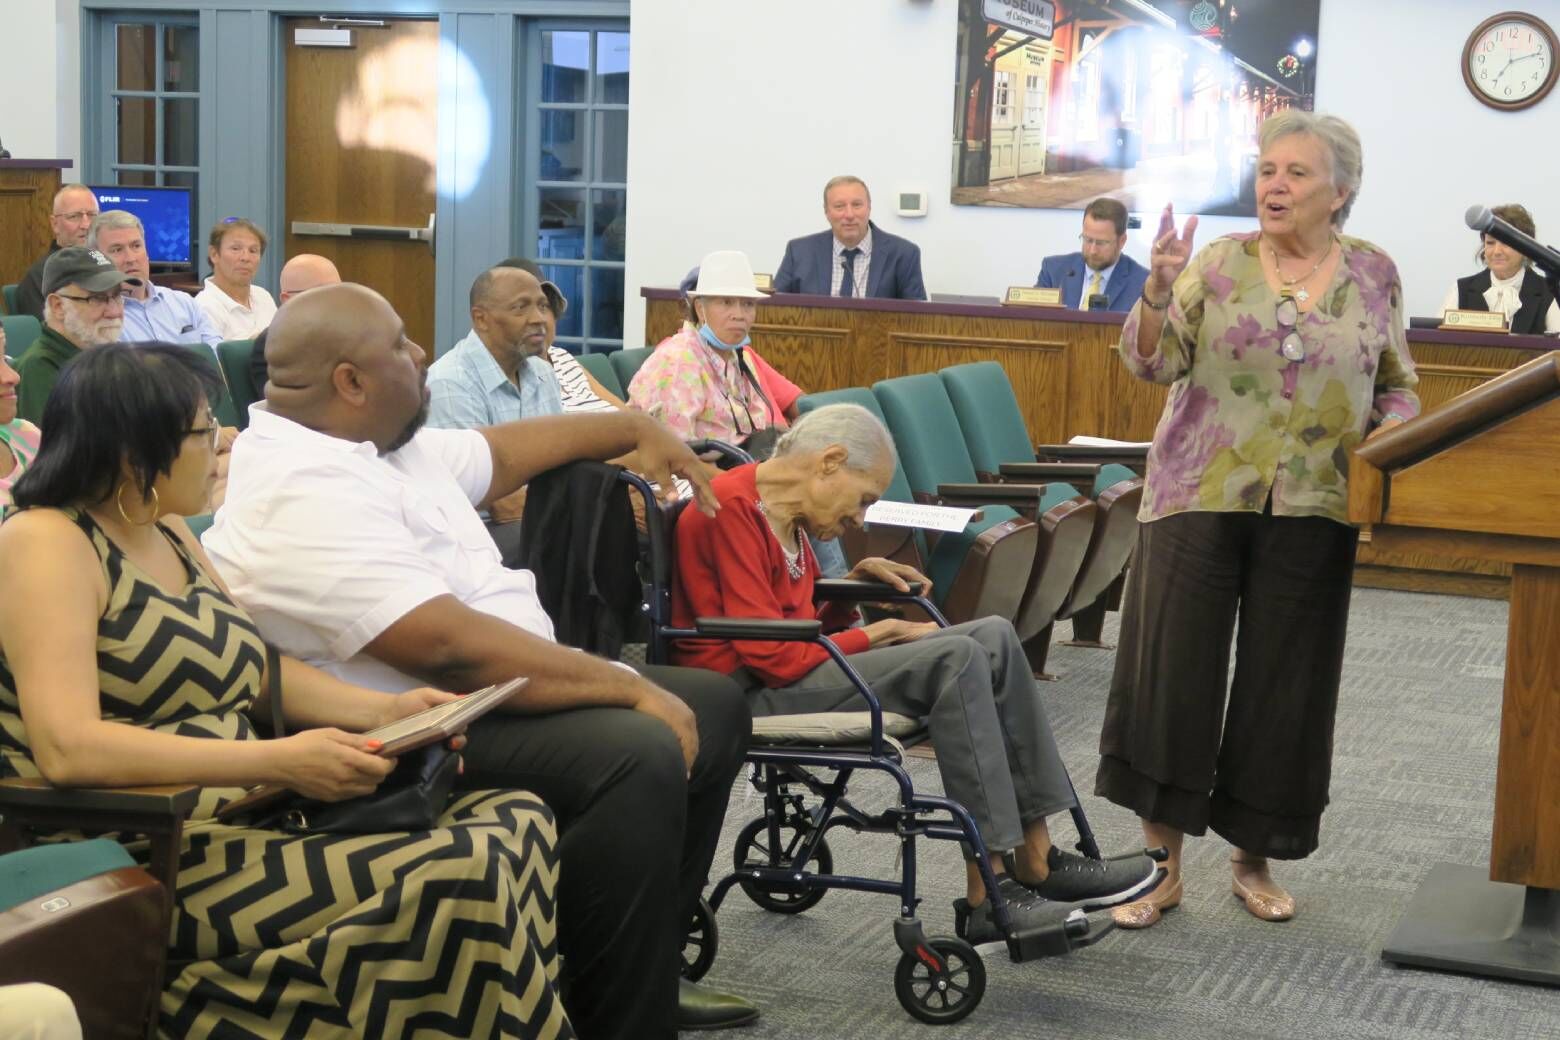 Culpeper County, Virginia, celebrated supercentenarian Dollie Booten Berry as she marked her 110th birthday. (Courtesy Allison Brophy Champion/Culpeper Star-Exponent)